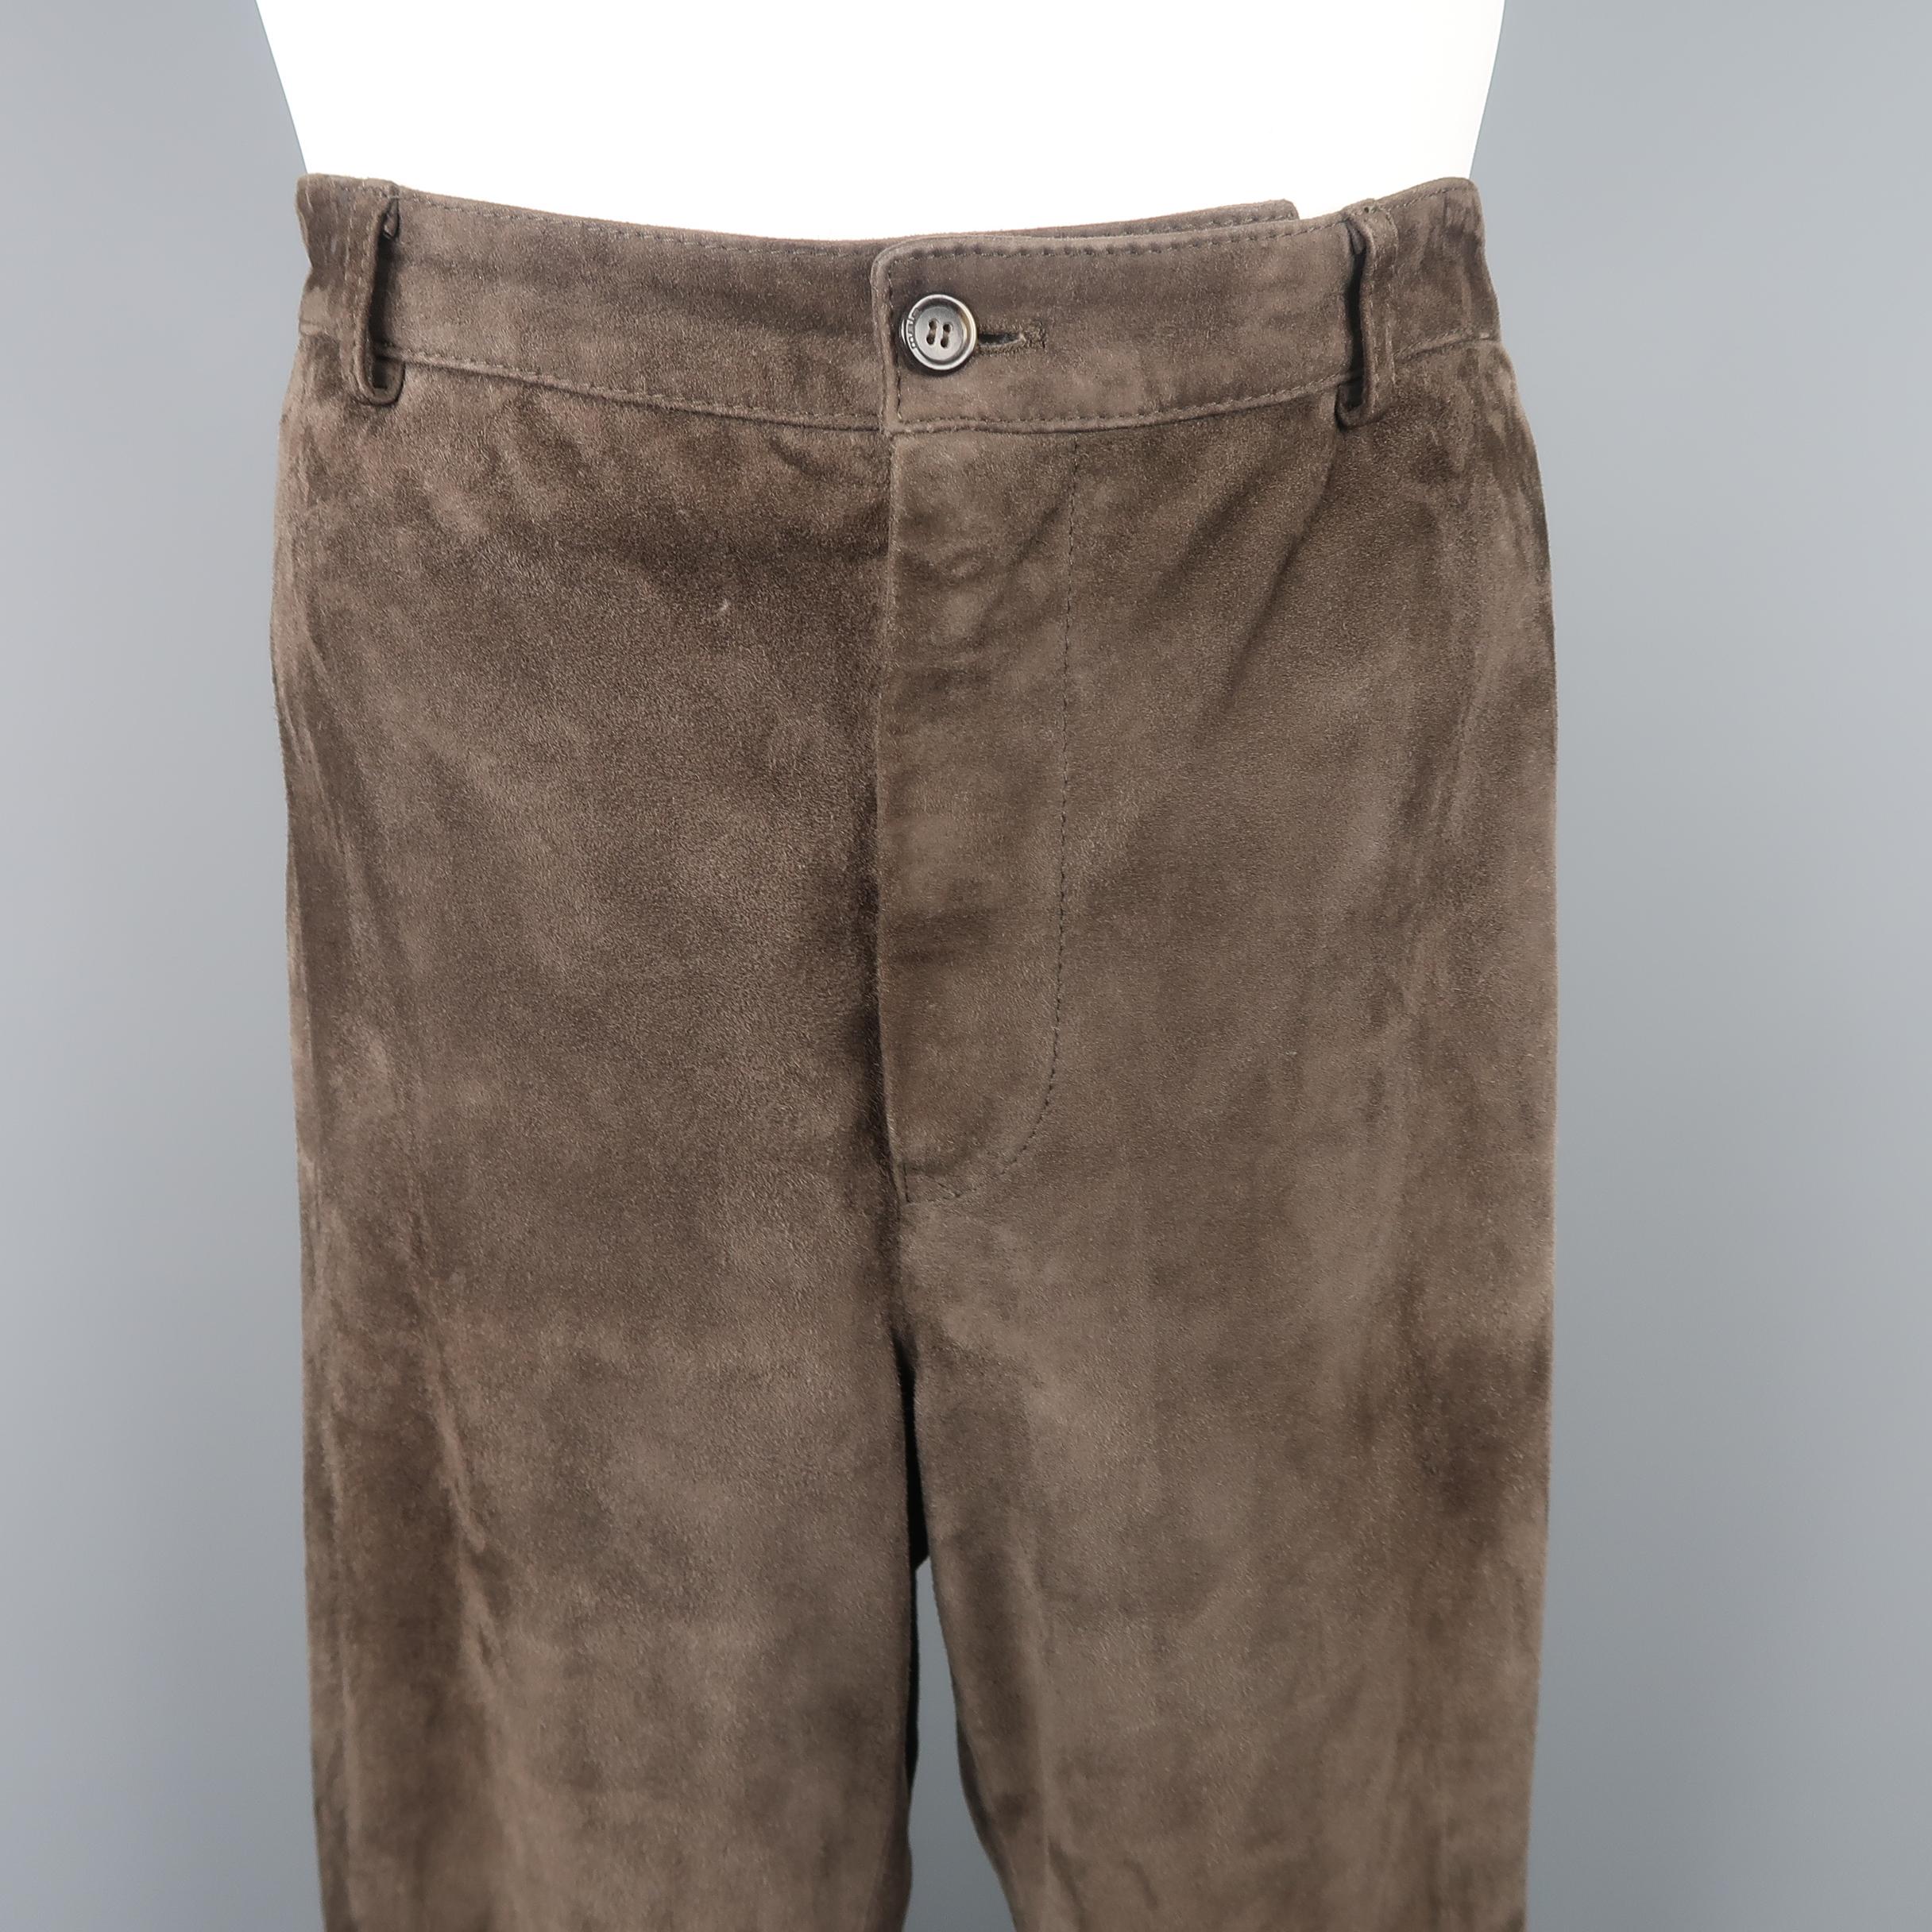 MALO casual pants come in neutral brown suede with a zip fly, straight leg, and button pockets. Made in Italy.
 
Good Pre-Owned Condition.
Marked: IT 5
 
Measurements:
 
Waist: 32 in.
Rise: 11 in.
Inseam: 32 in.